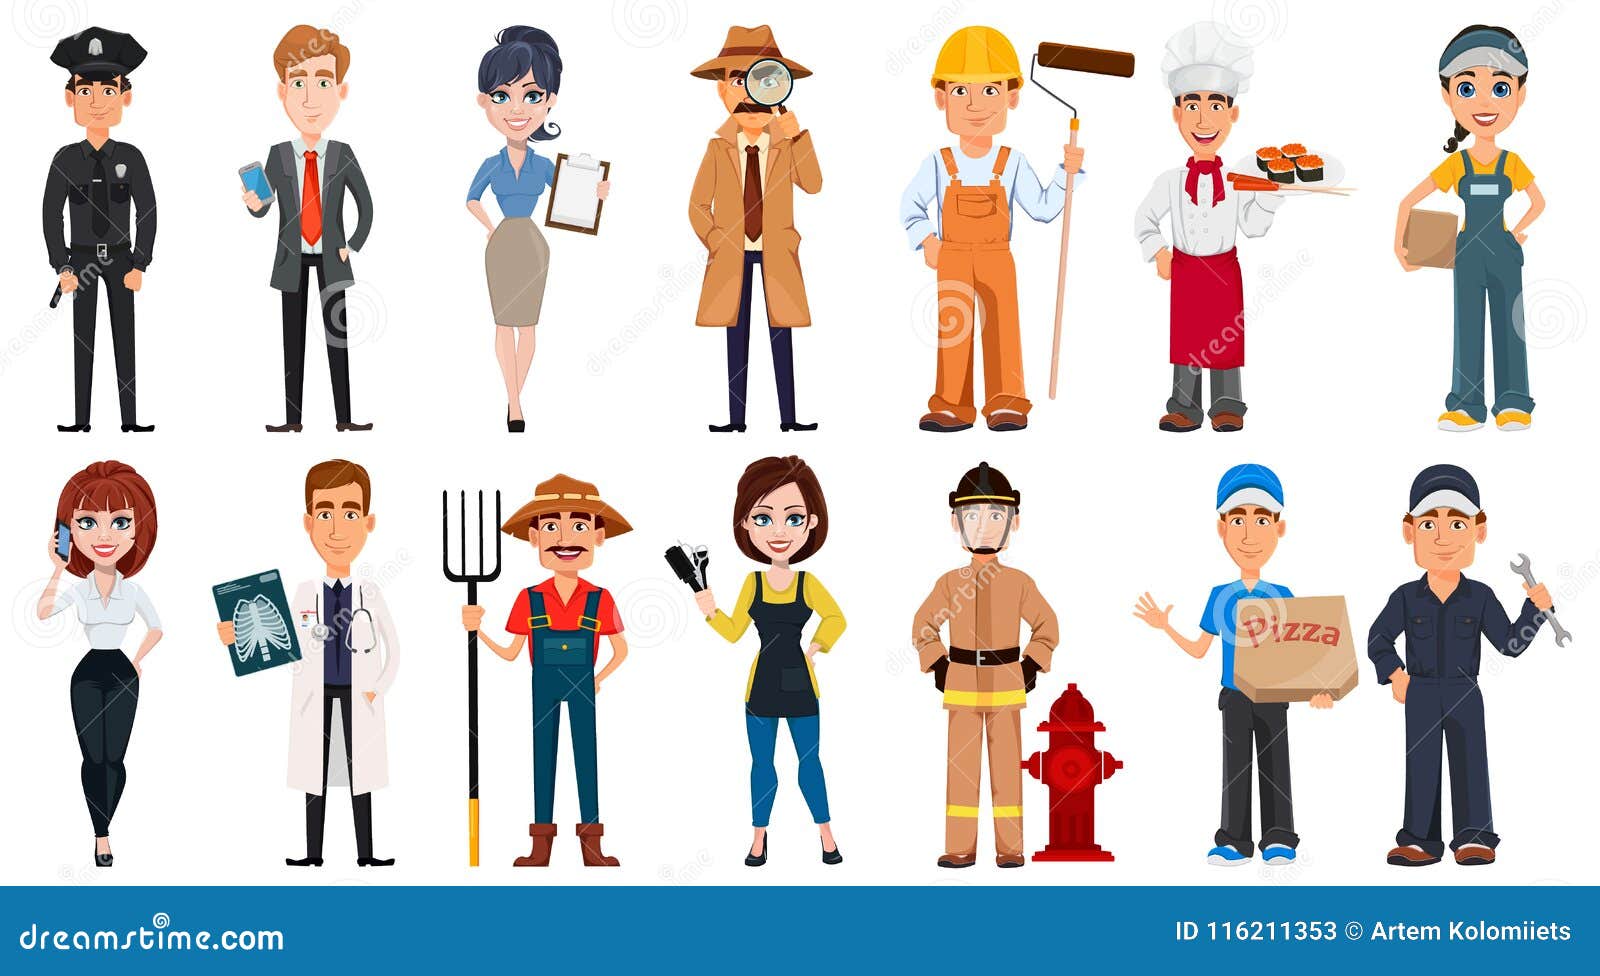 set of cartoon characters with various occupations.